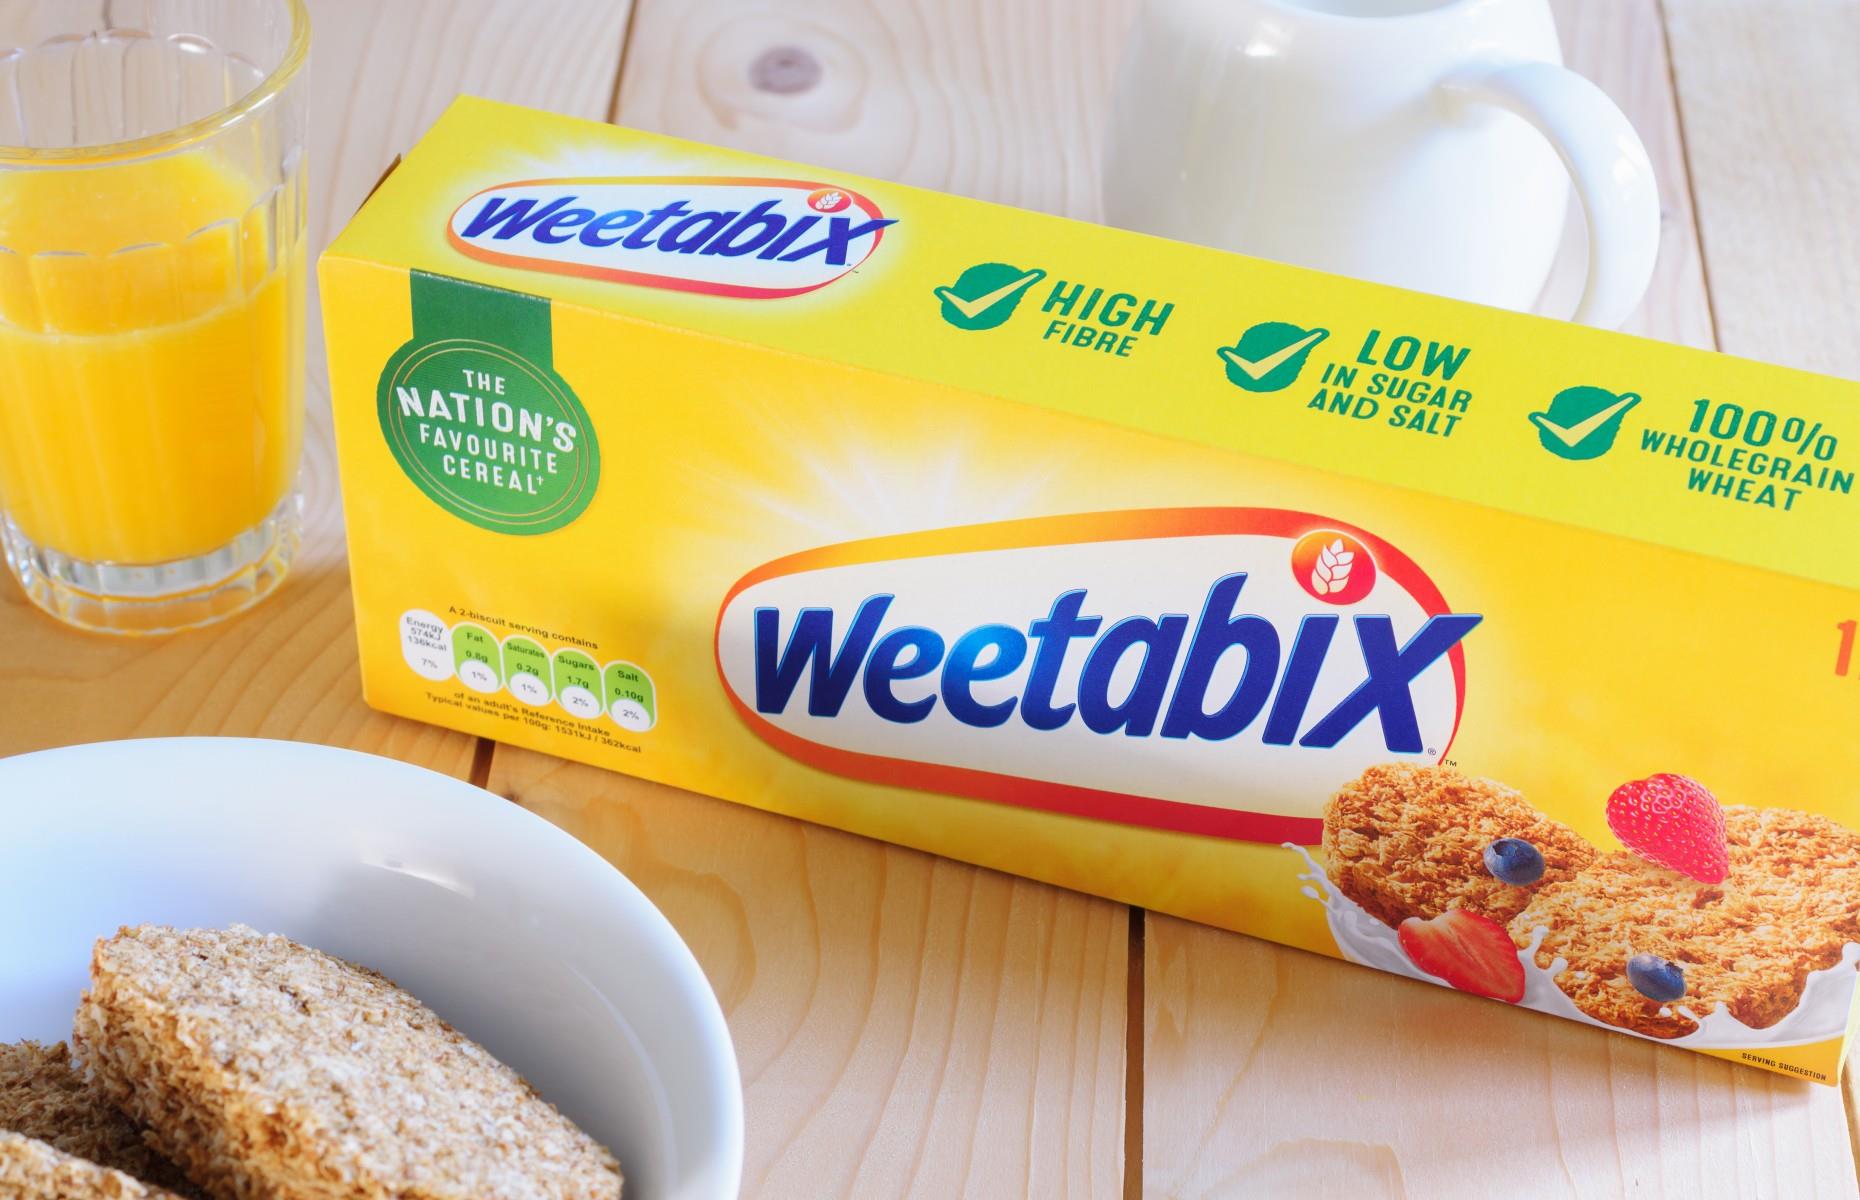 Weetabix: owned by Post Holdings